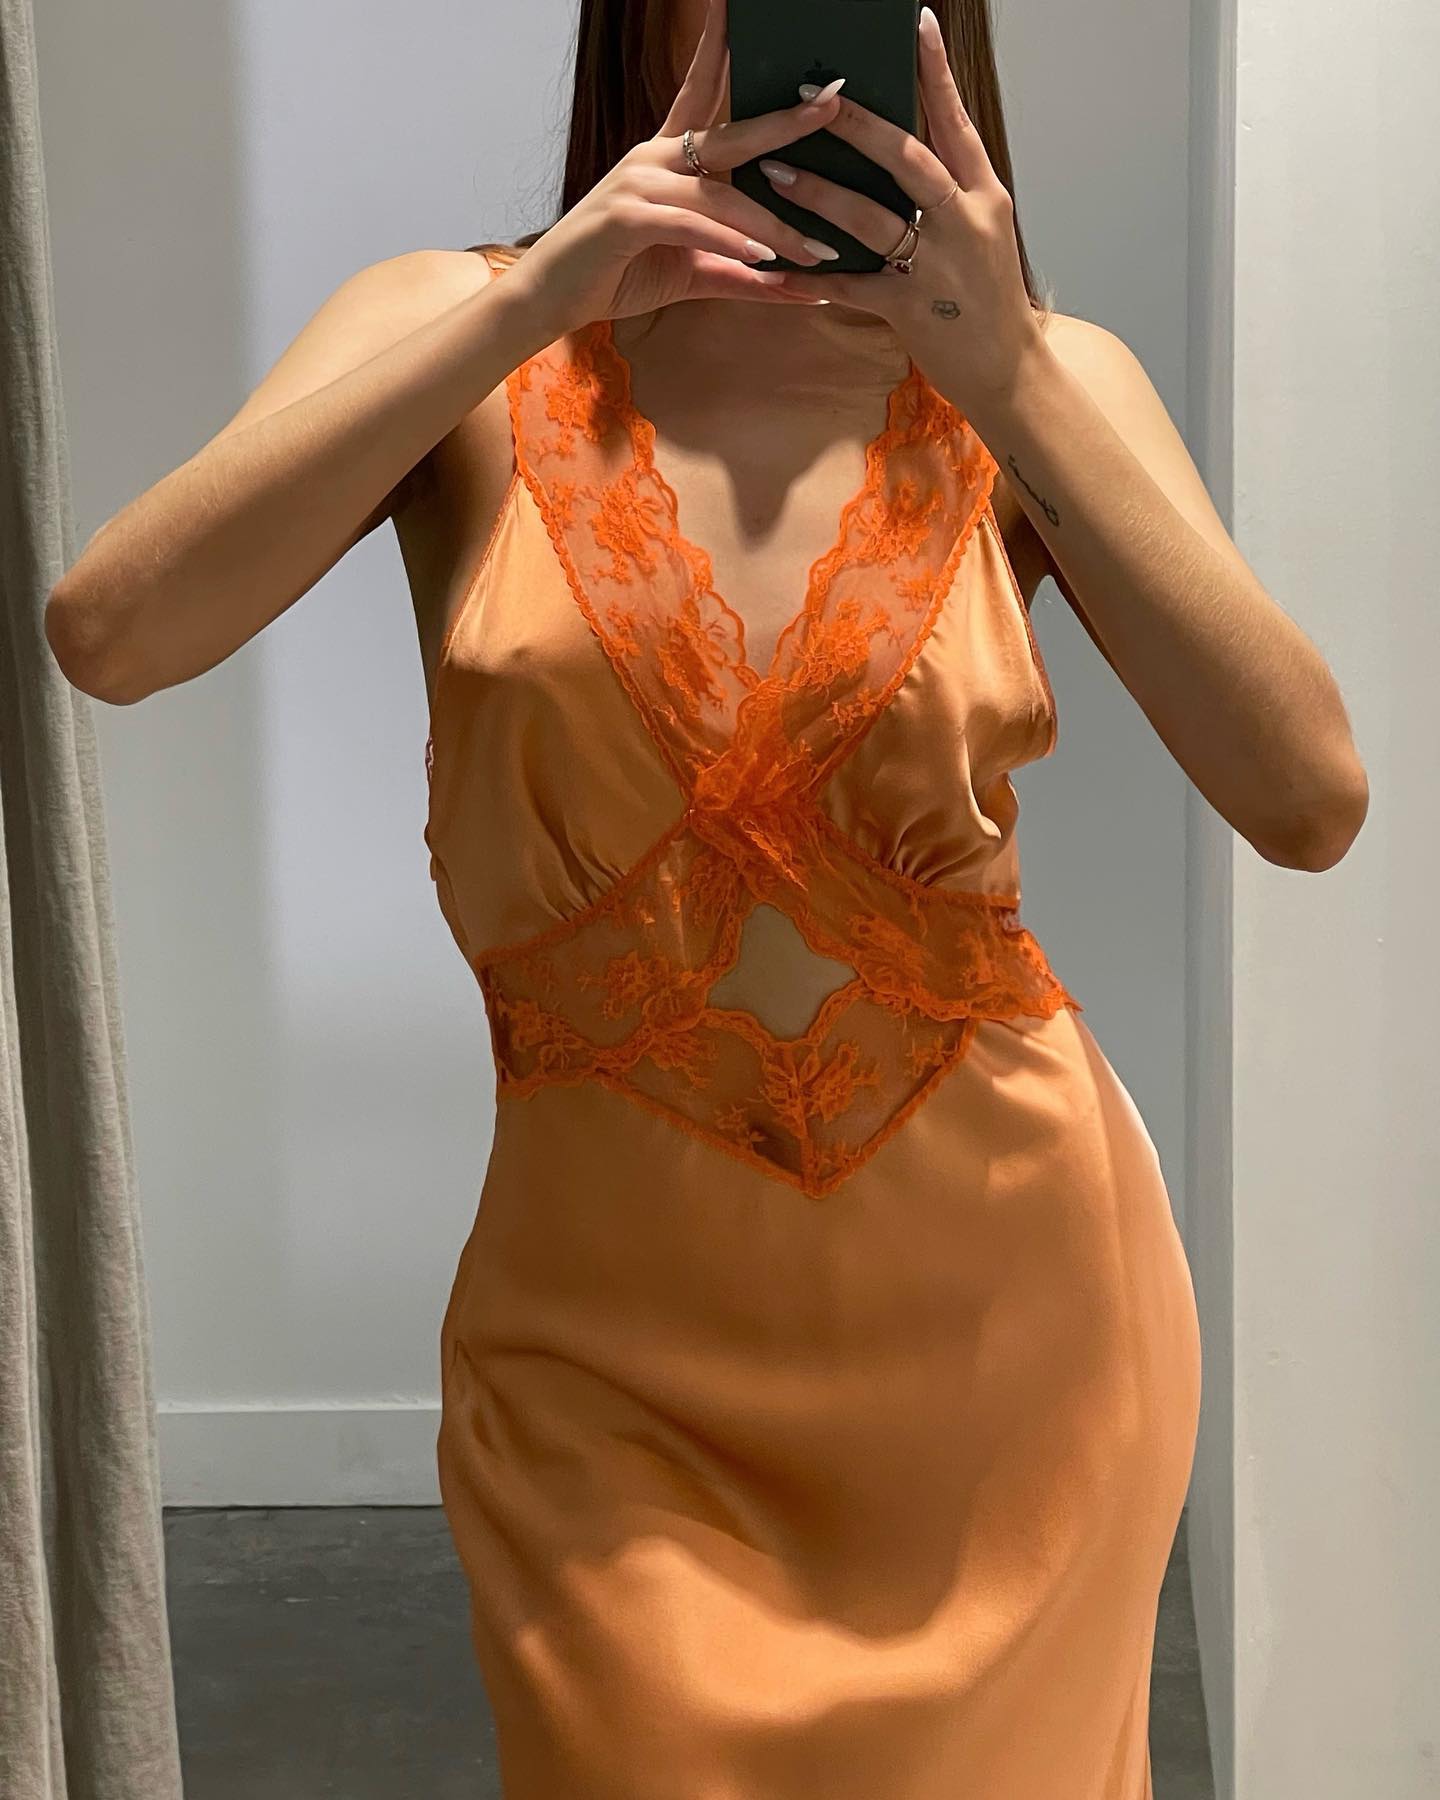 SIR the Label Aries Cut Out Gown Peach